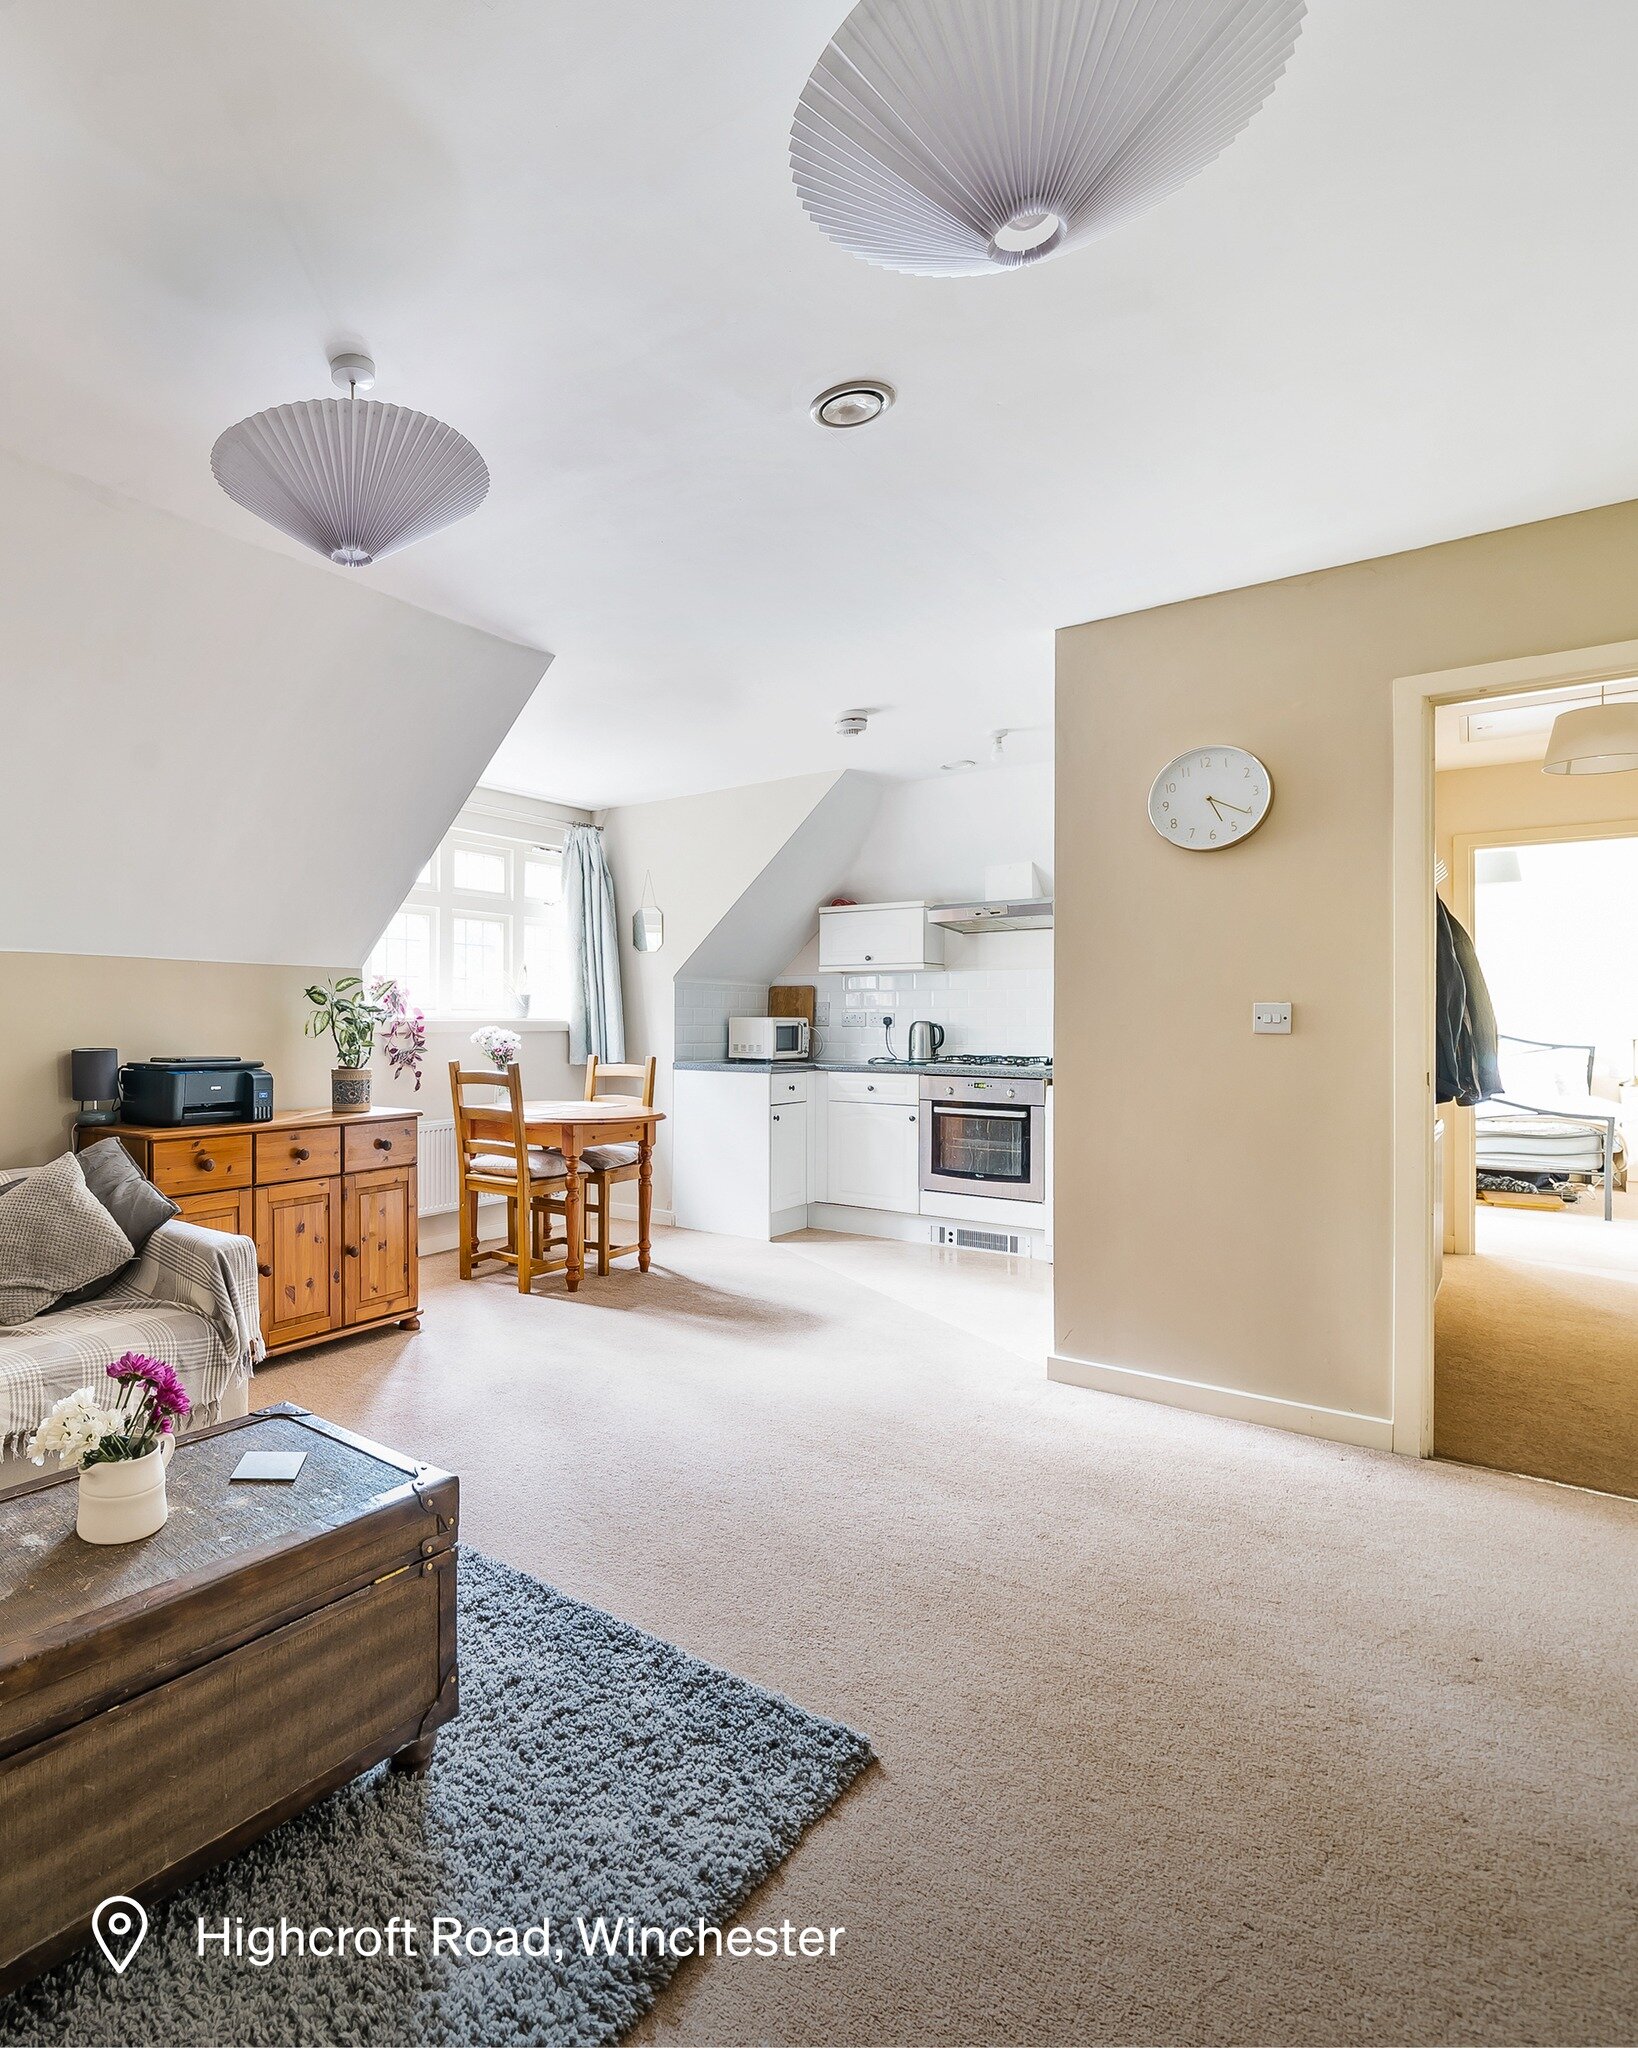 #ForSale Situated in the heart of the desirable Highcroft Road, this stunning one-bedroom top-floor apartment seamlessly combines comfort, convenience, and modern living.

📍 Highcroft Road
💷 &pound;239,950 
🛏 1 Bedroom
🛁 1 Bathroom
🏡 Top Floor A